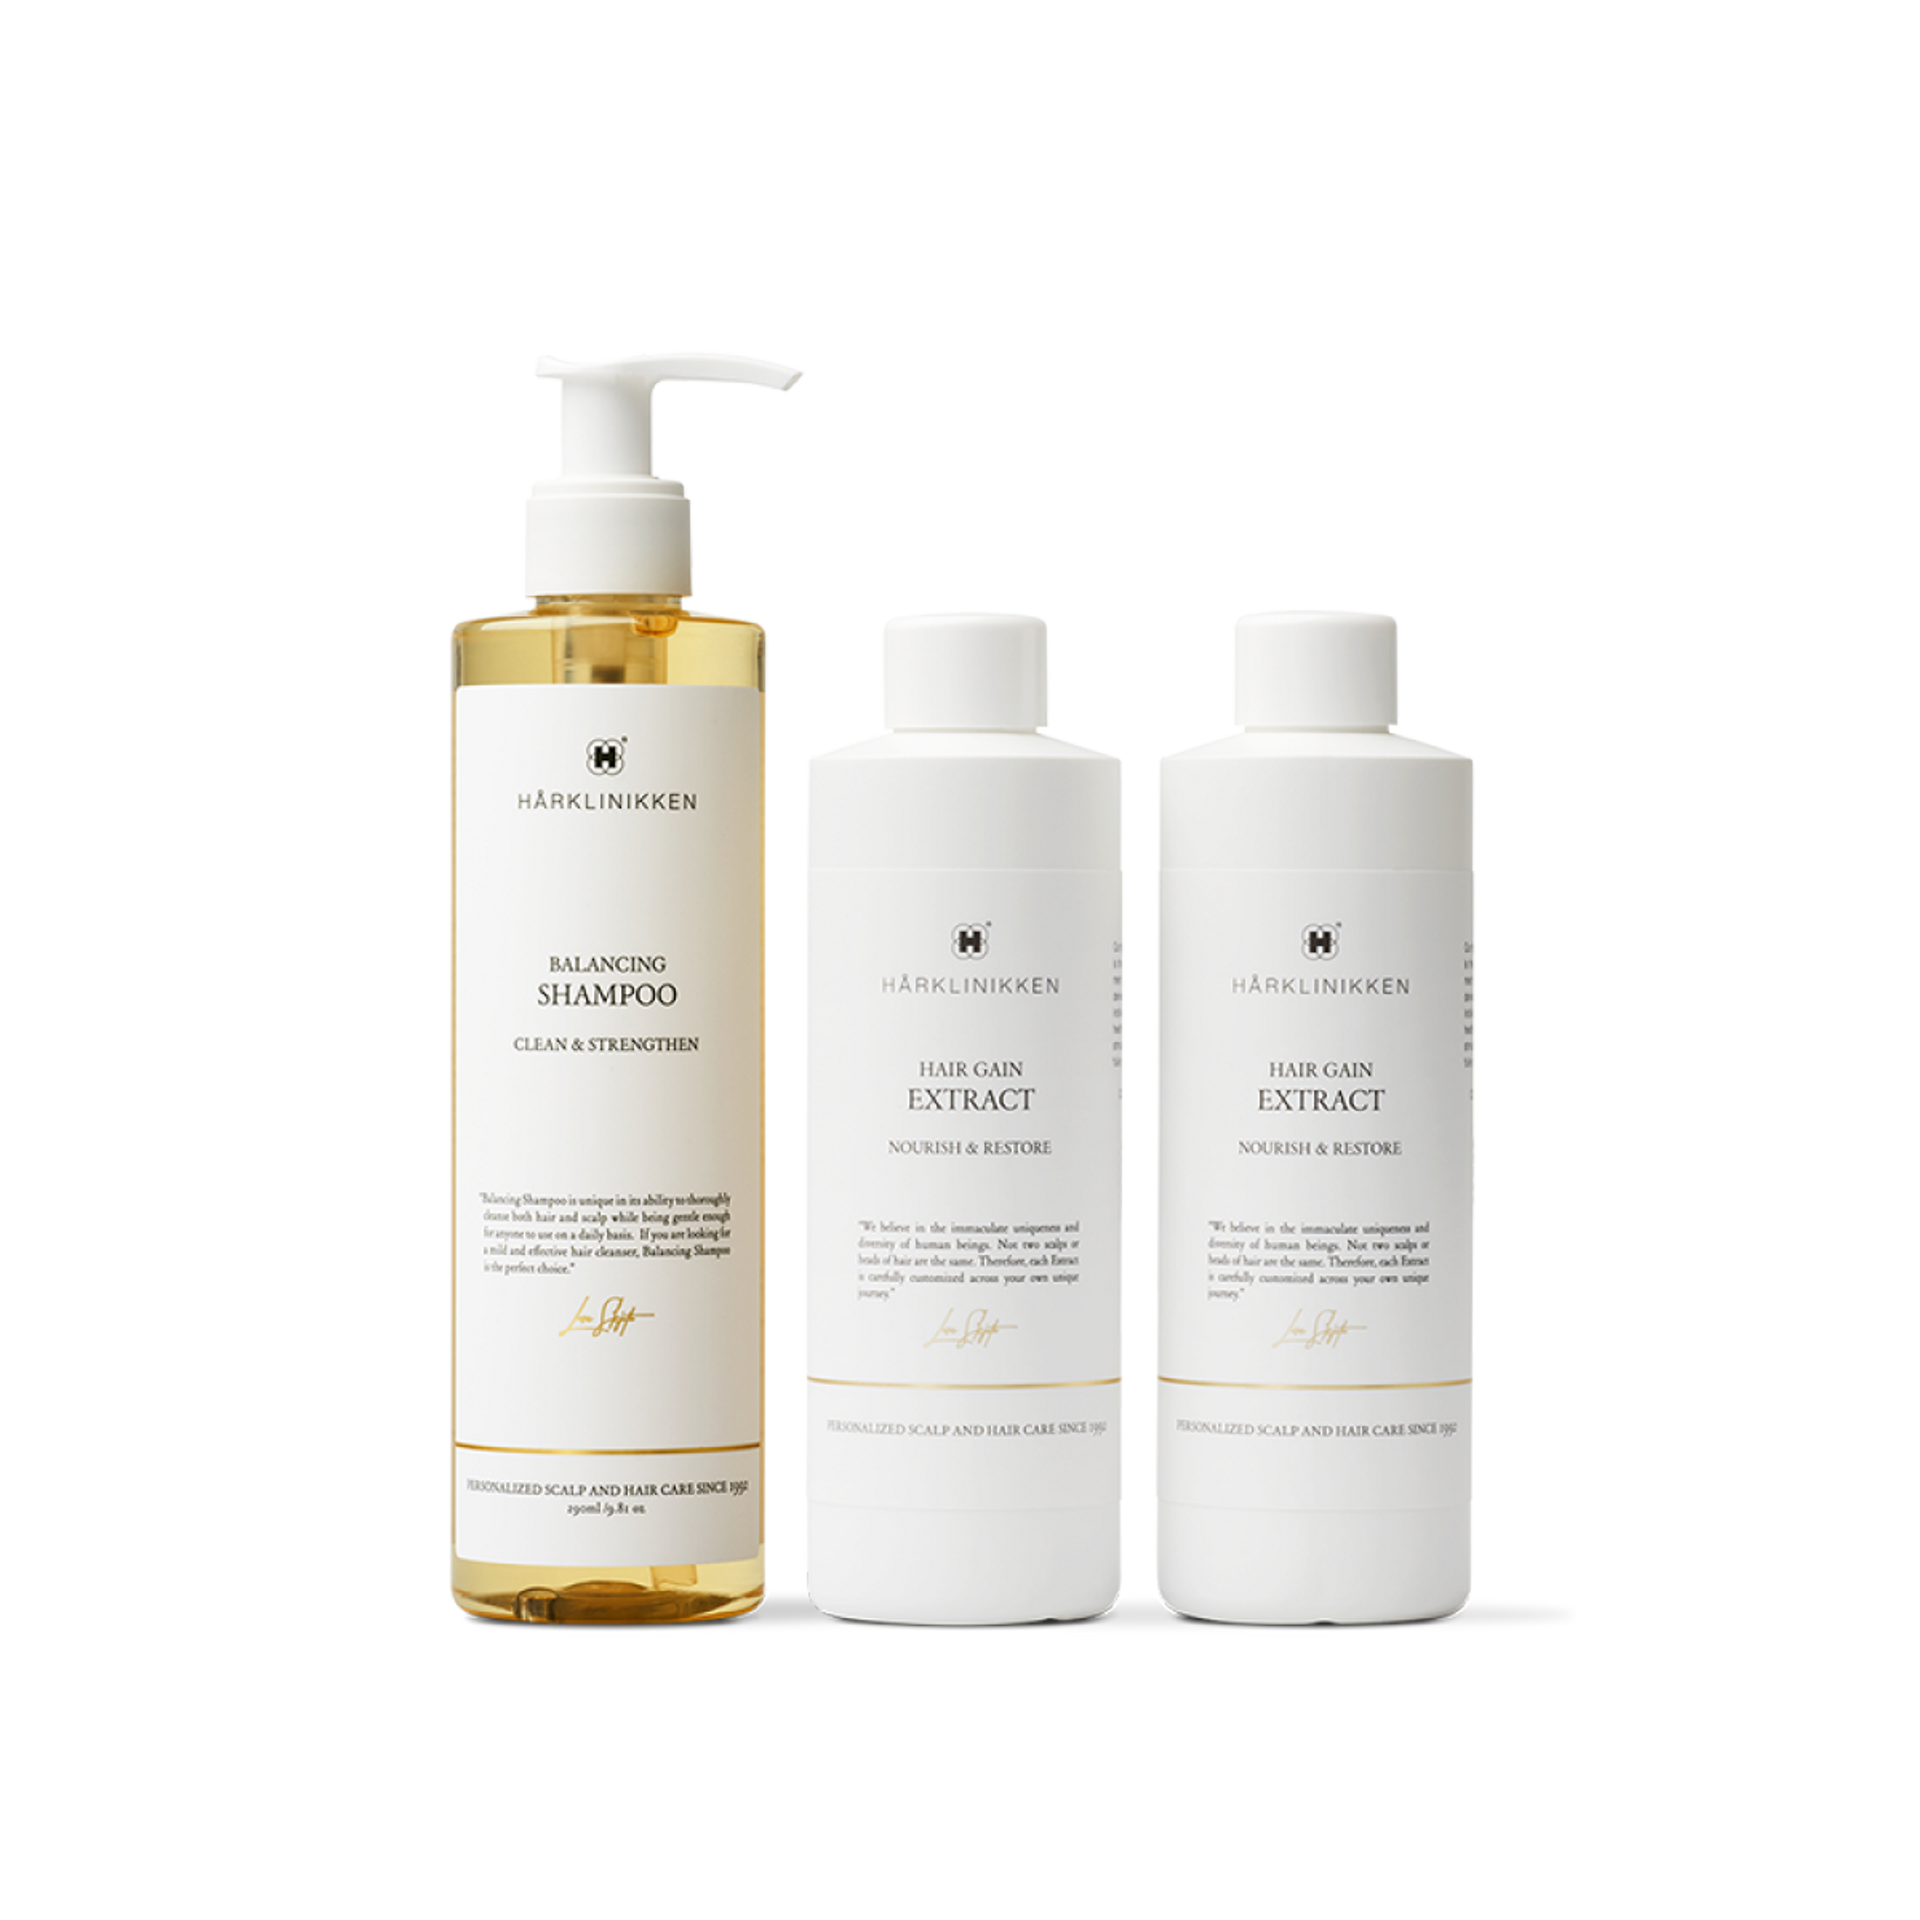 Harklinikken Membership Set 2 with two Hair Gain Extracts and Balancing Shampoo